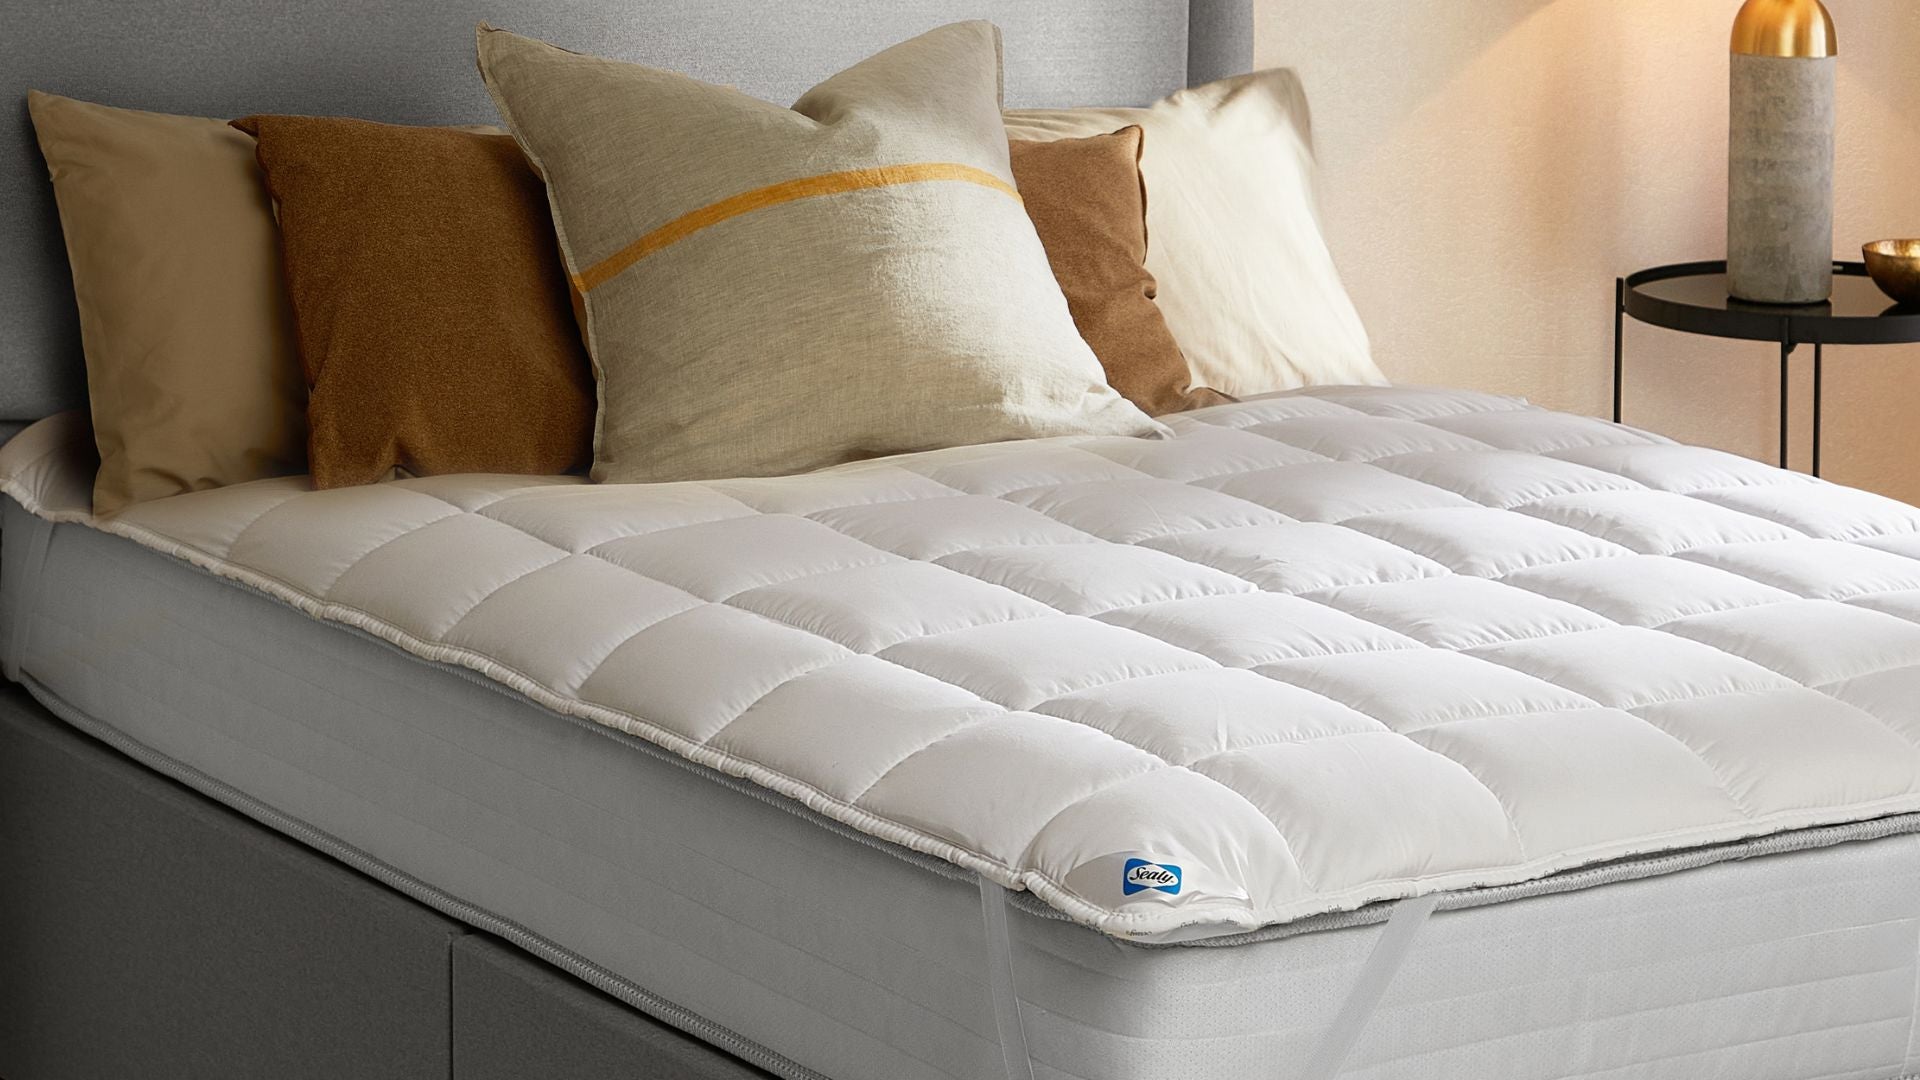 Why buy a mattress topper? The undeniable benefits